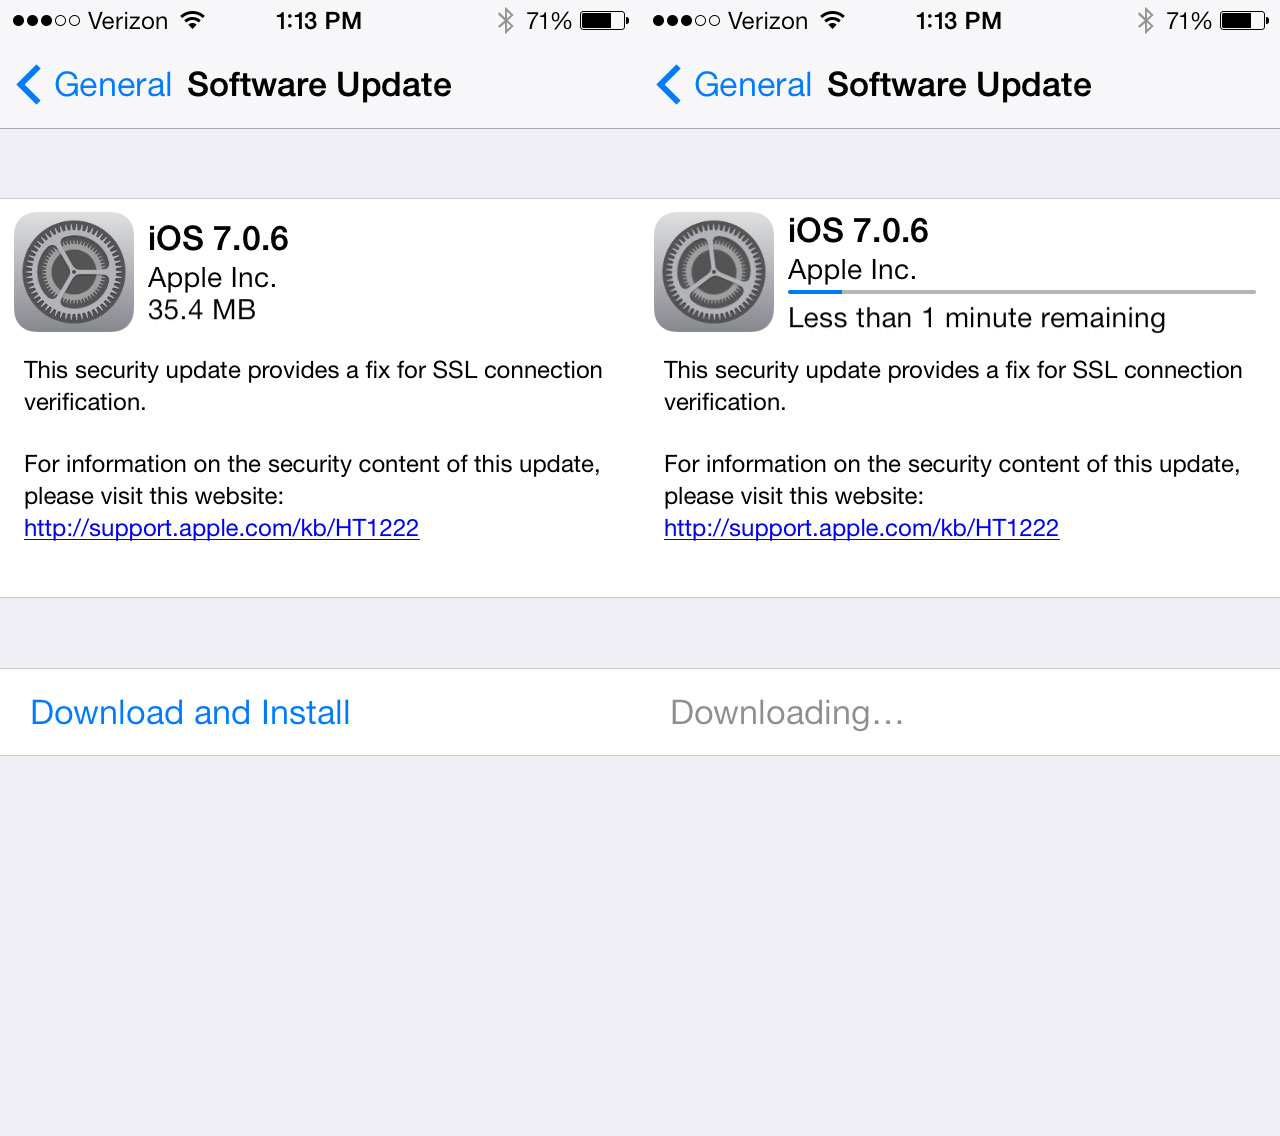 The iOS 7.0.6 update arrives for iPhone, iPad and iPod touch, but doesn't fix the growing list of iOS 7 problems users are most vocal about.